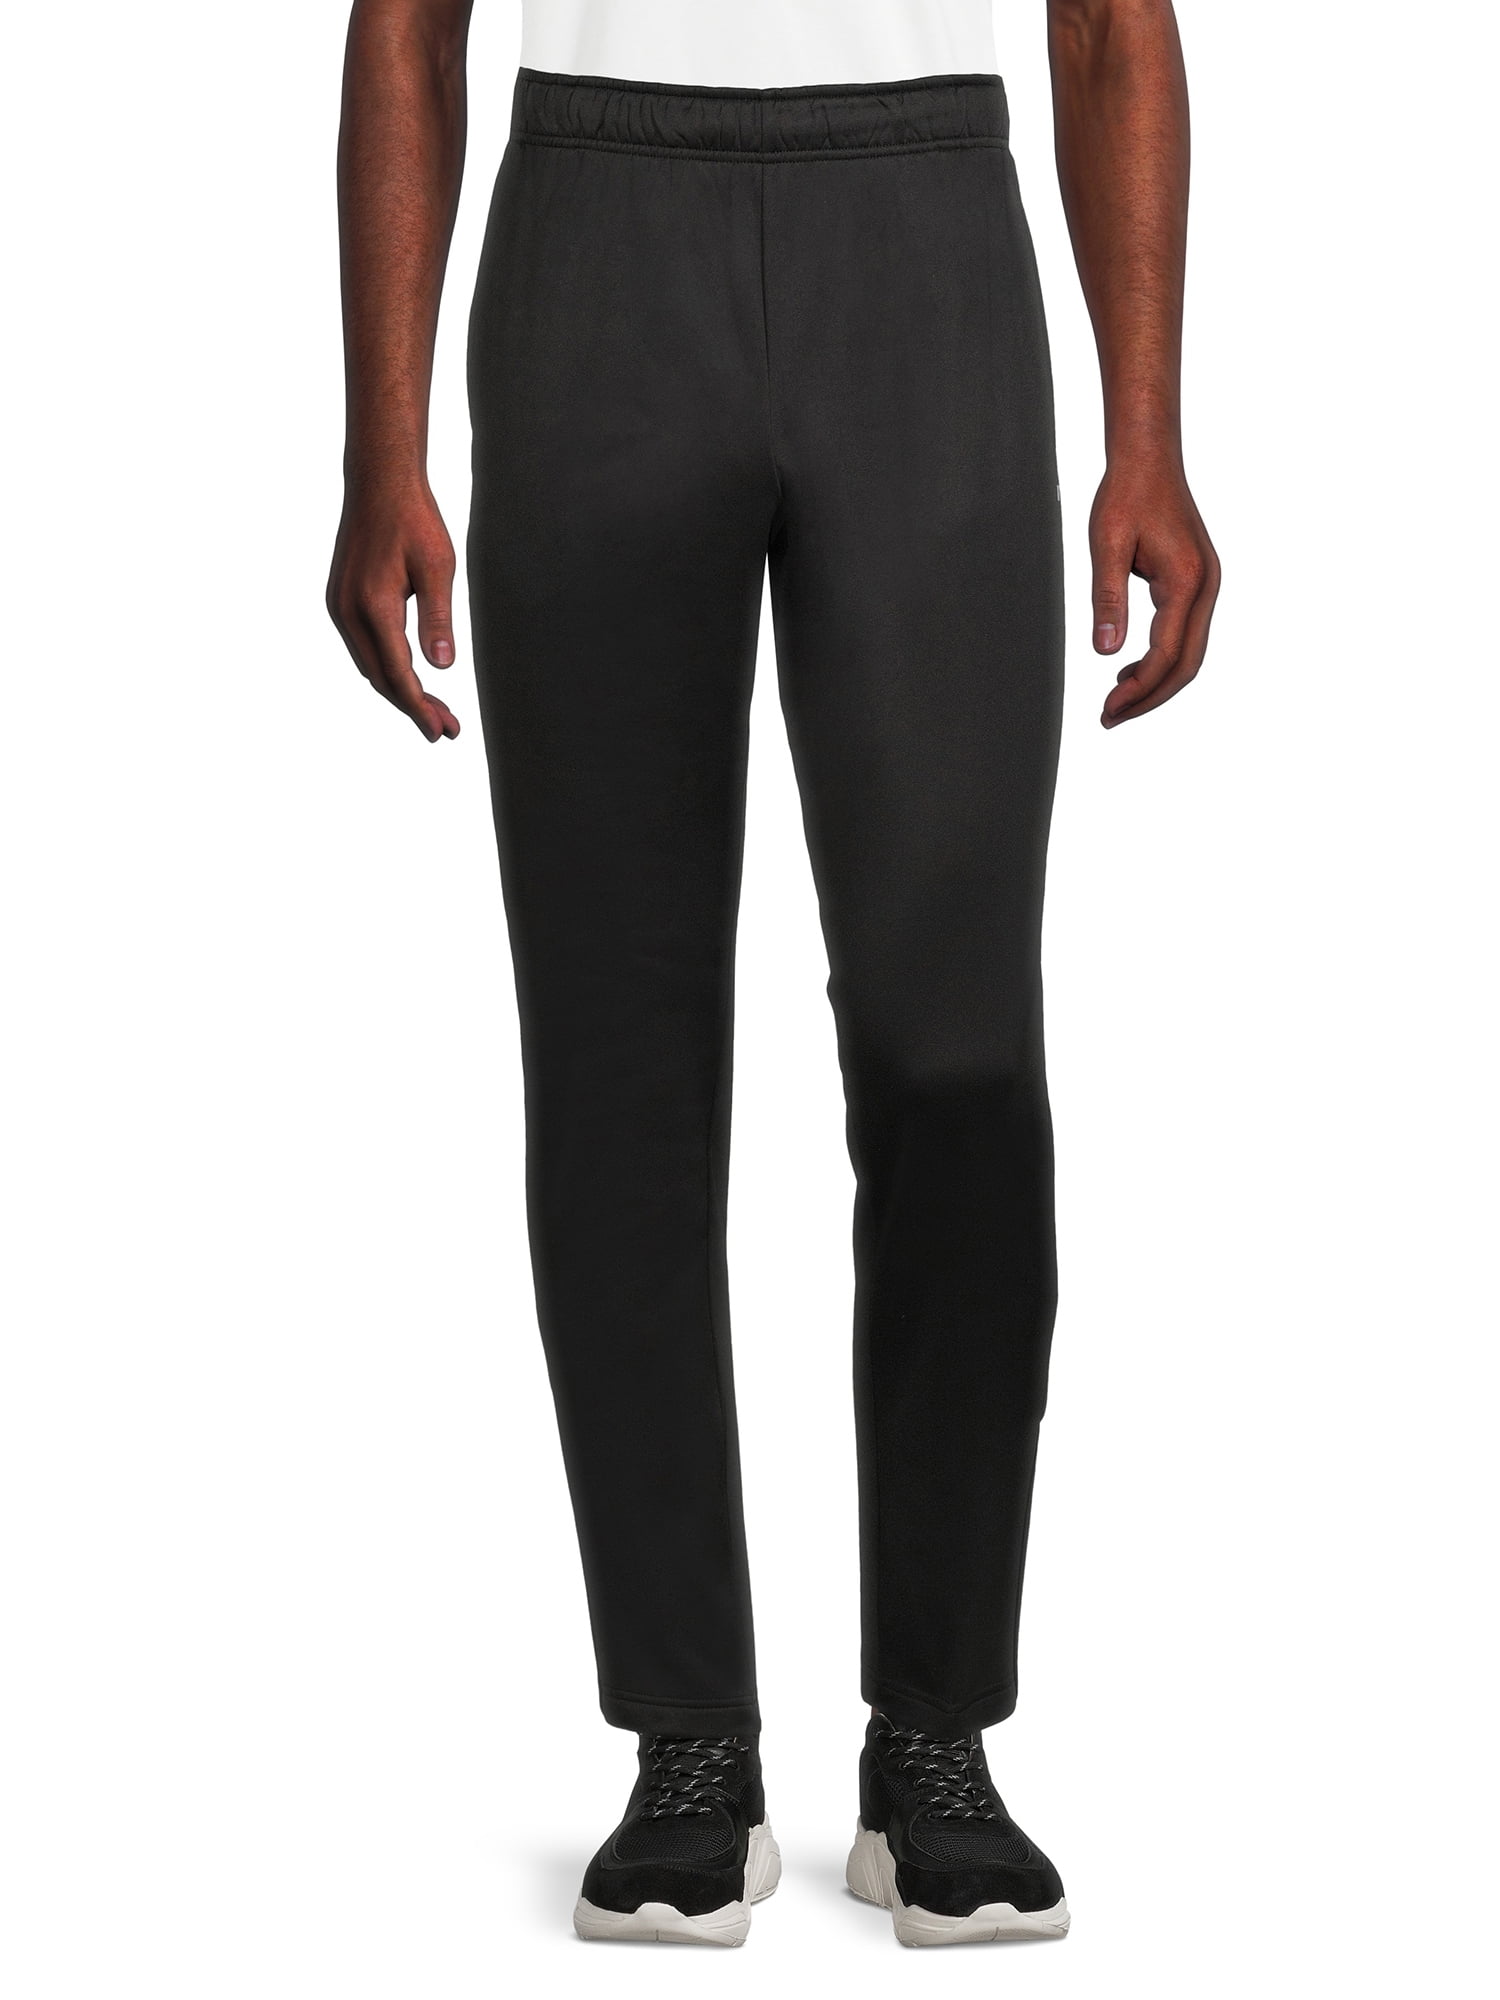 Find Your Perfect Russell Men s Tech Fleece Pants, up to size 3XL ...